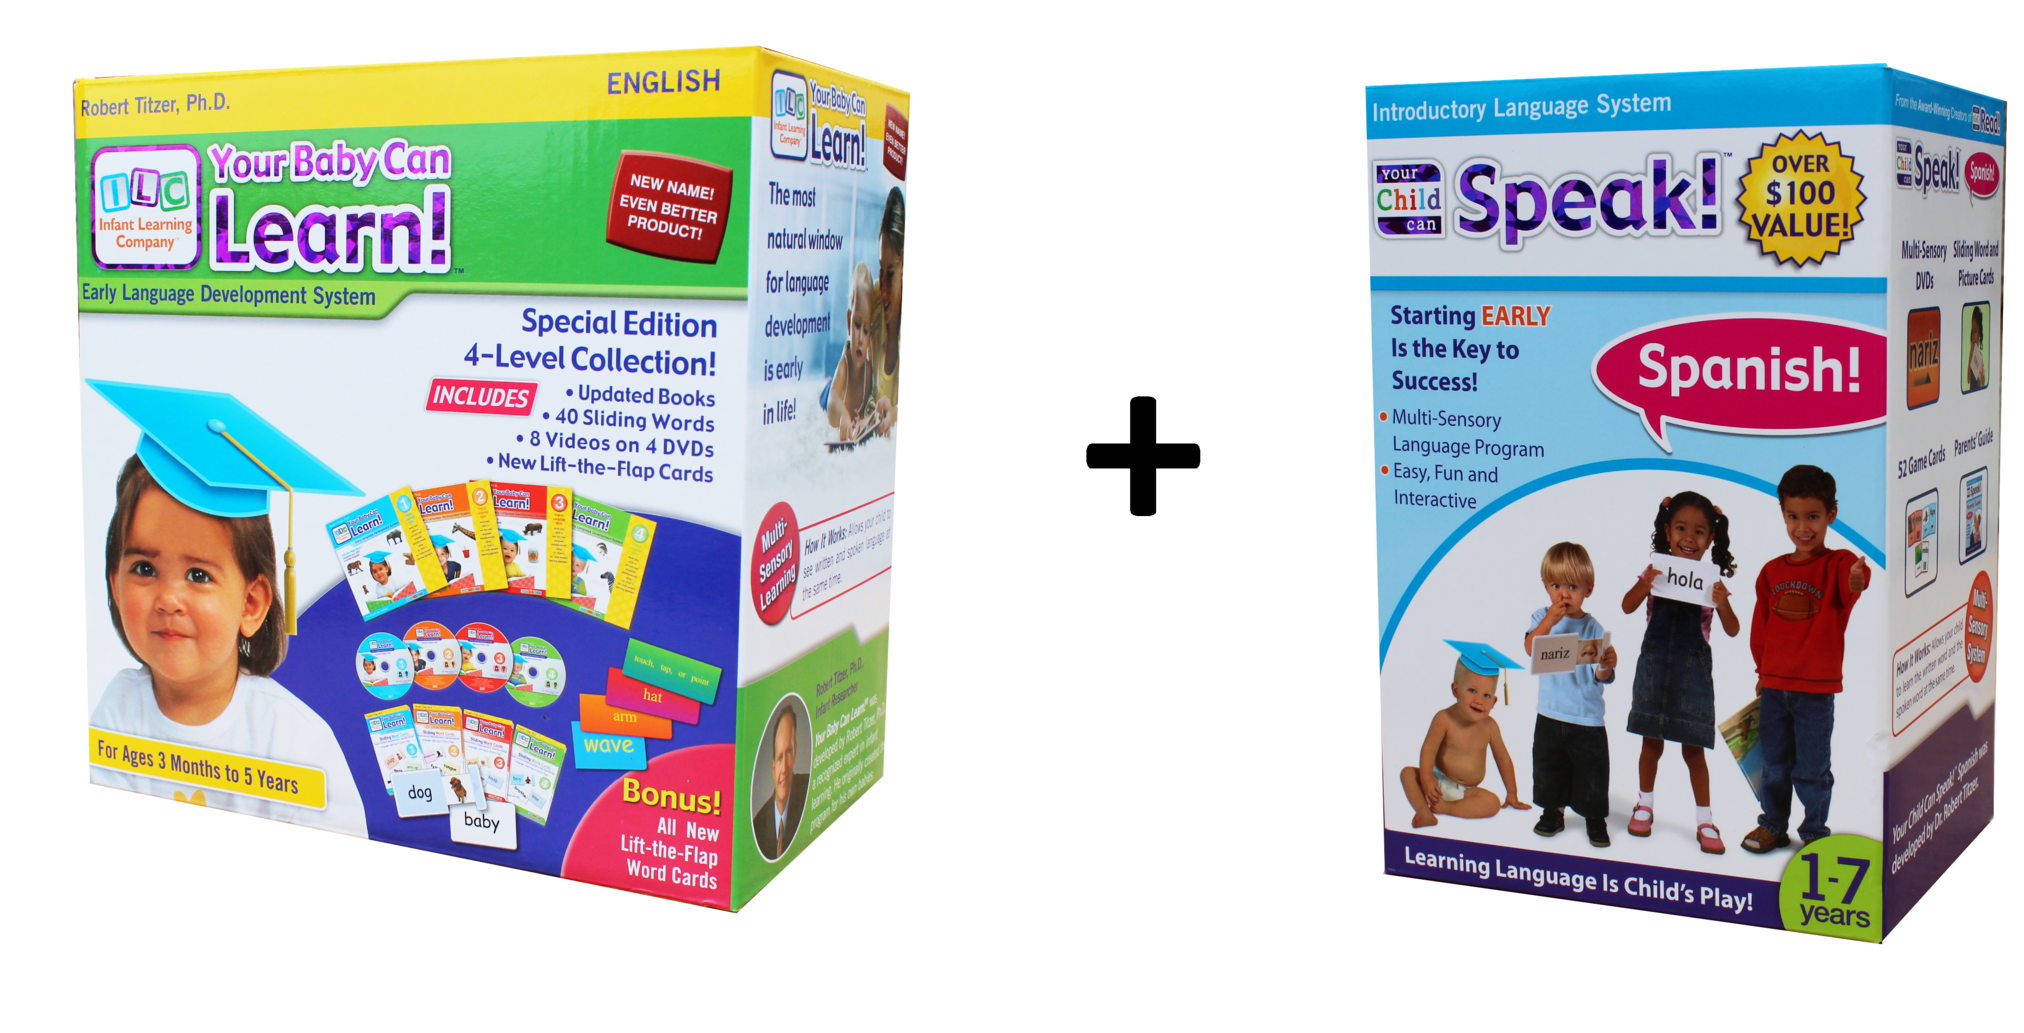 your-baby-can-learn-english-spanish-combo-language-kit-winter-sa-family-learning-depot